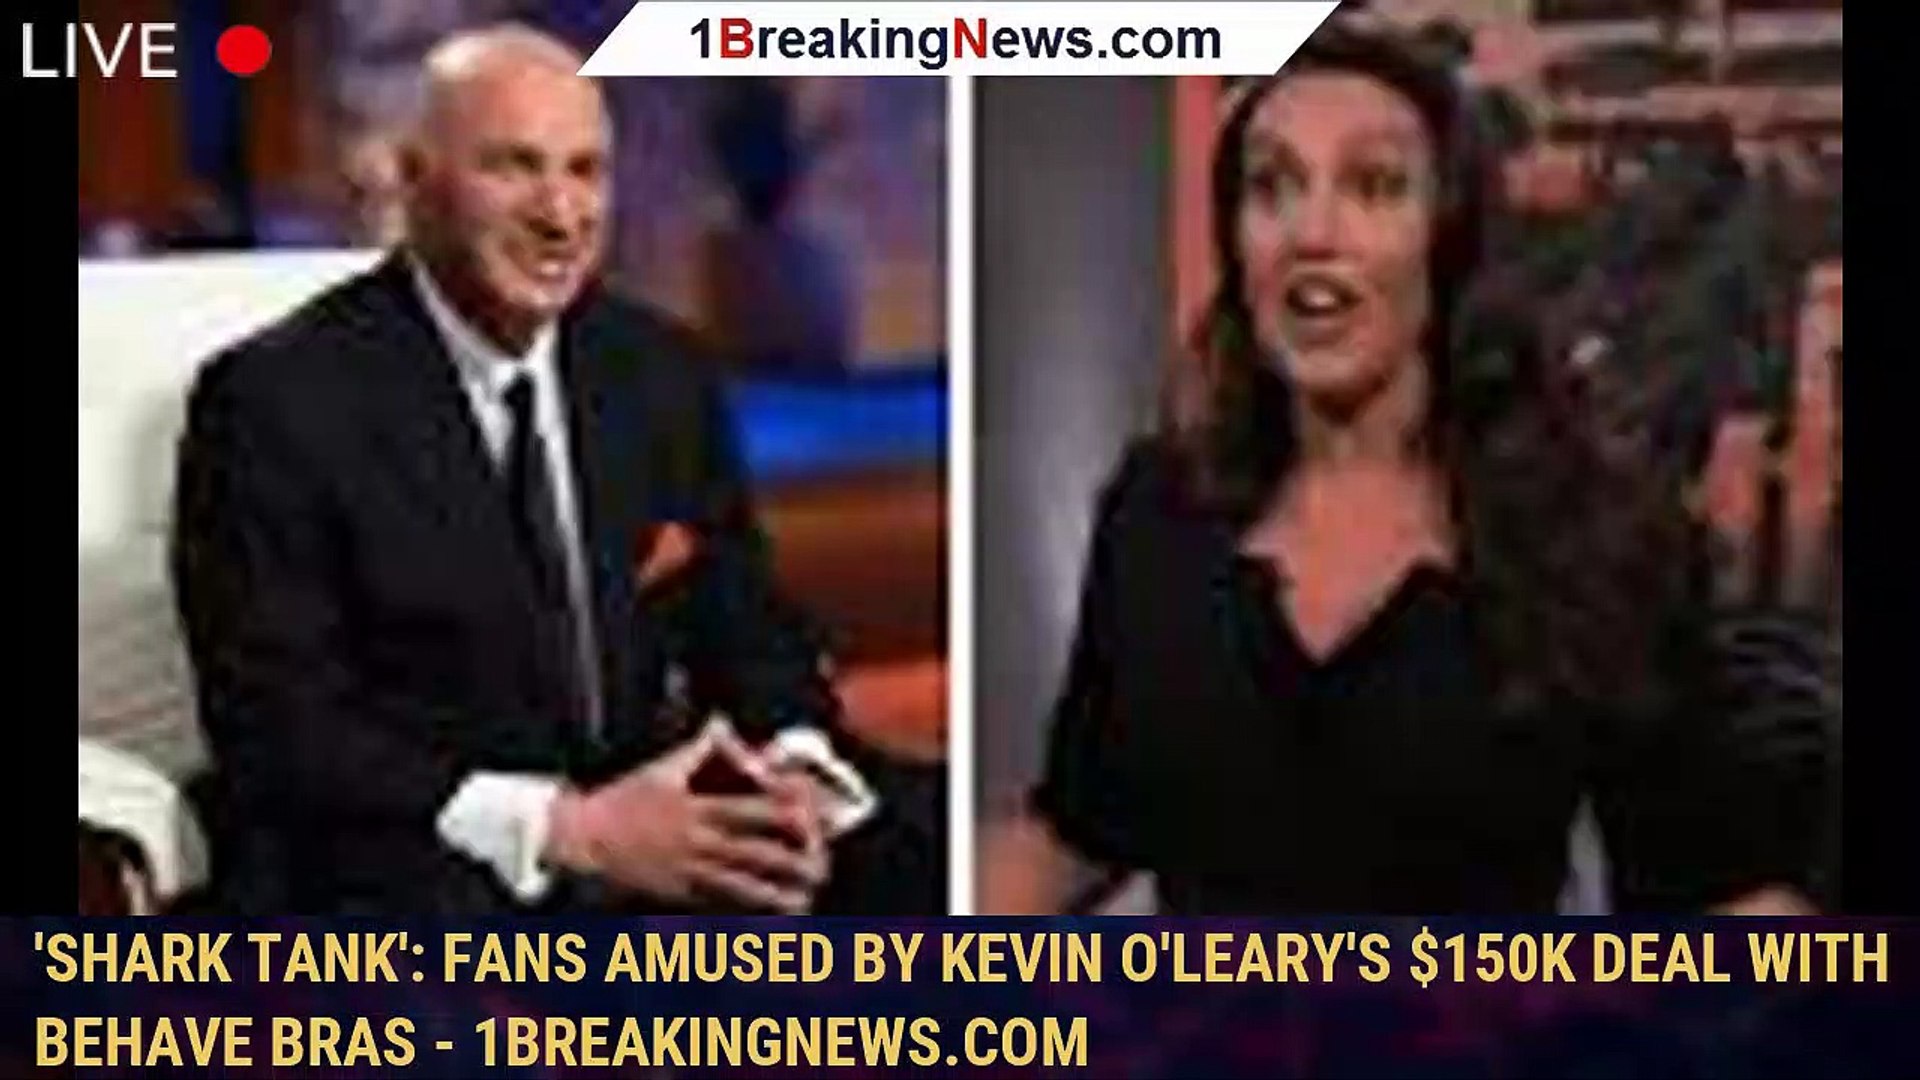 Shark Tank': Fans amused by Kevin O'Leary's $150k deal with Behave